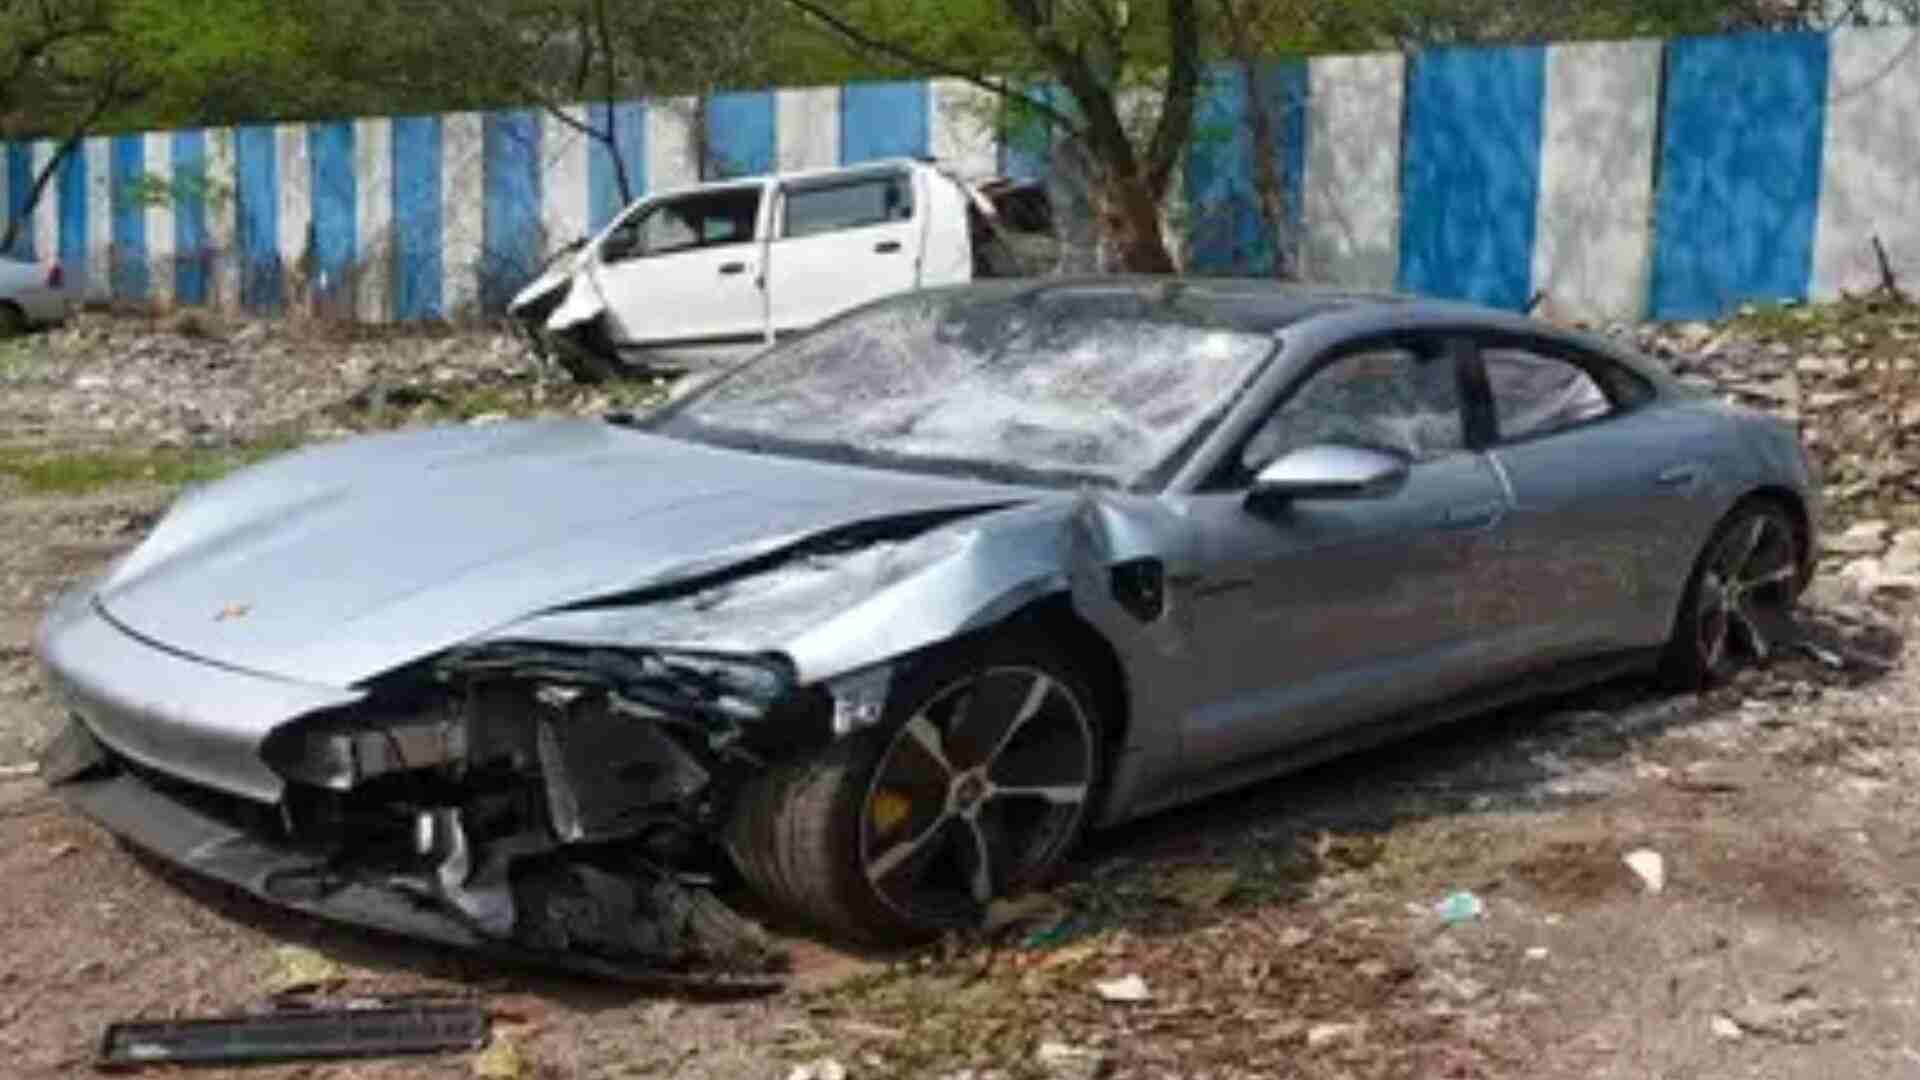 Pune Porsche Case: Teen Driver Questioned About The Accident, He Responds